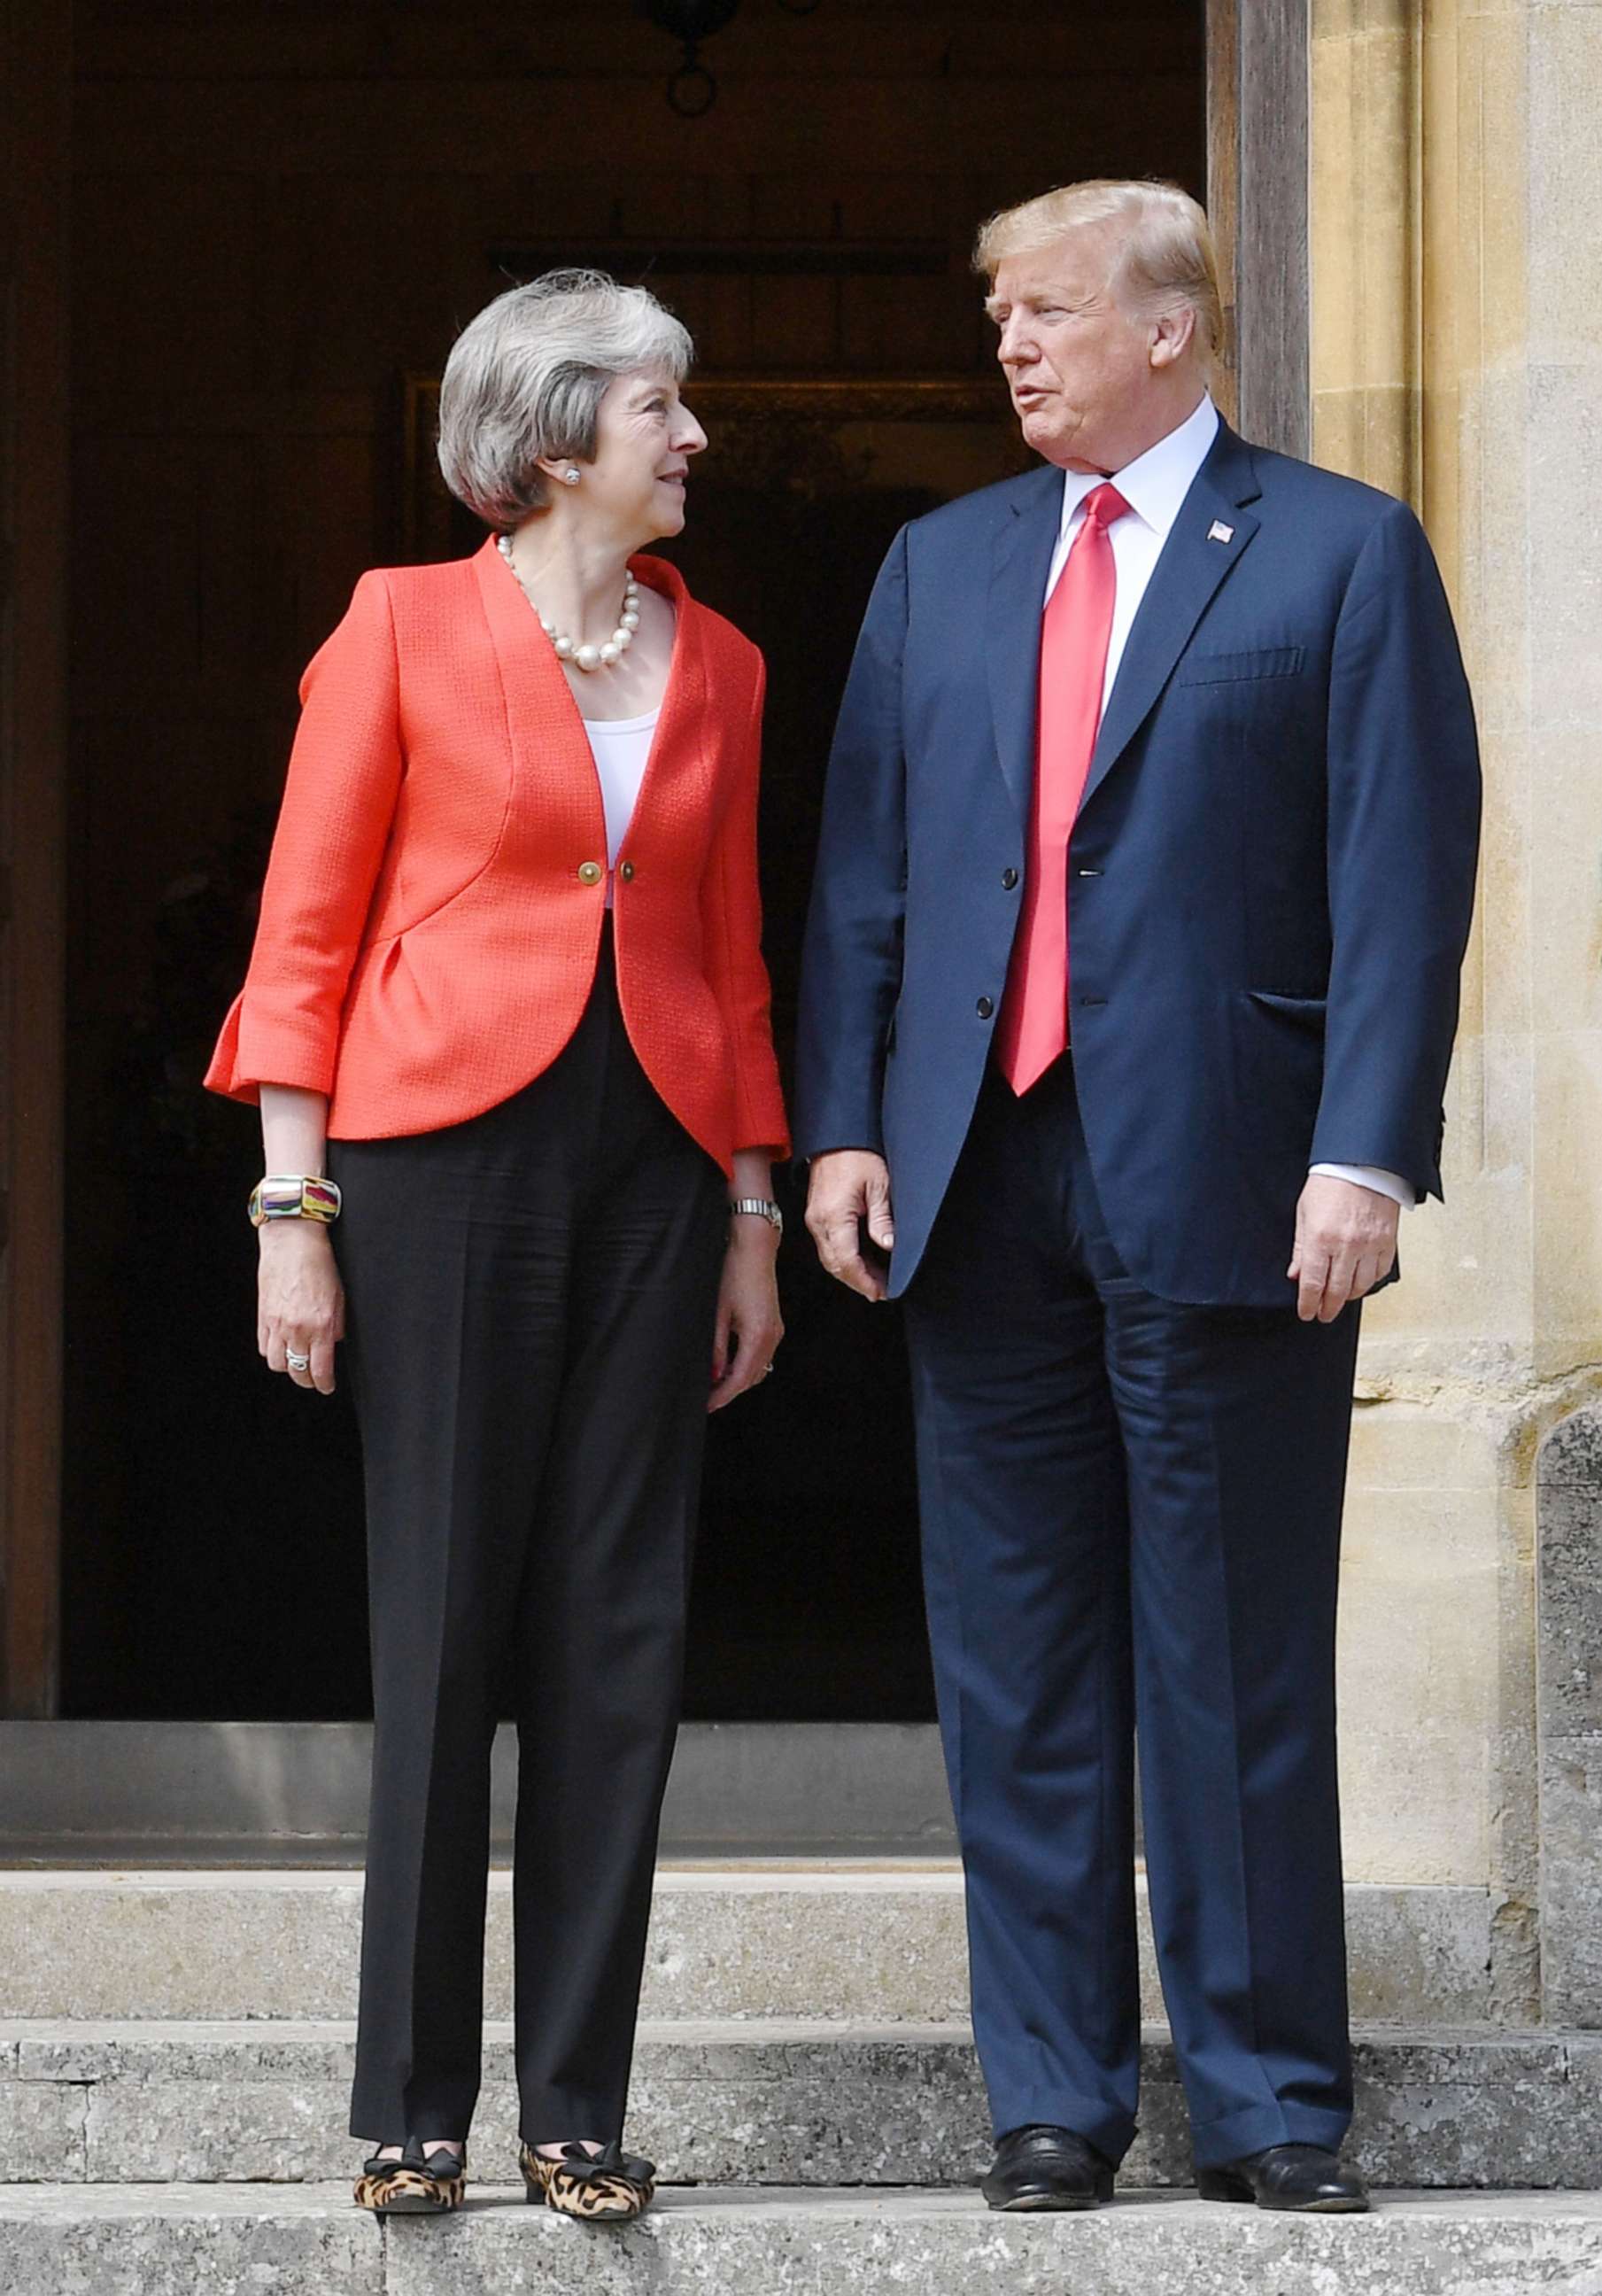 PHOTO: President Donald Trump and Britain's Prime Minister Theresa May stand together upon Trump's arrival for a meeting at Chequers, the prime minister's country residence, near Ellesborough, northwest of London, July 13, 2018.